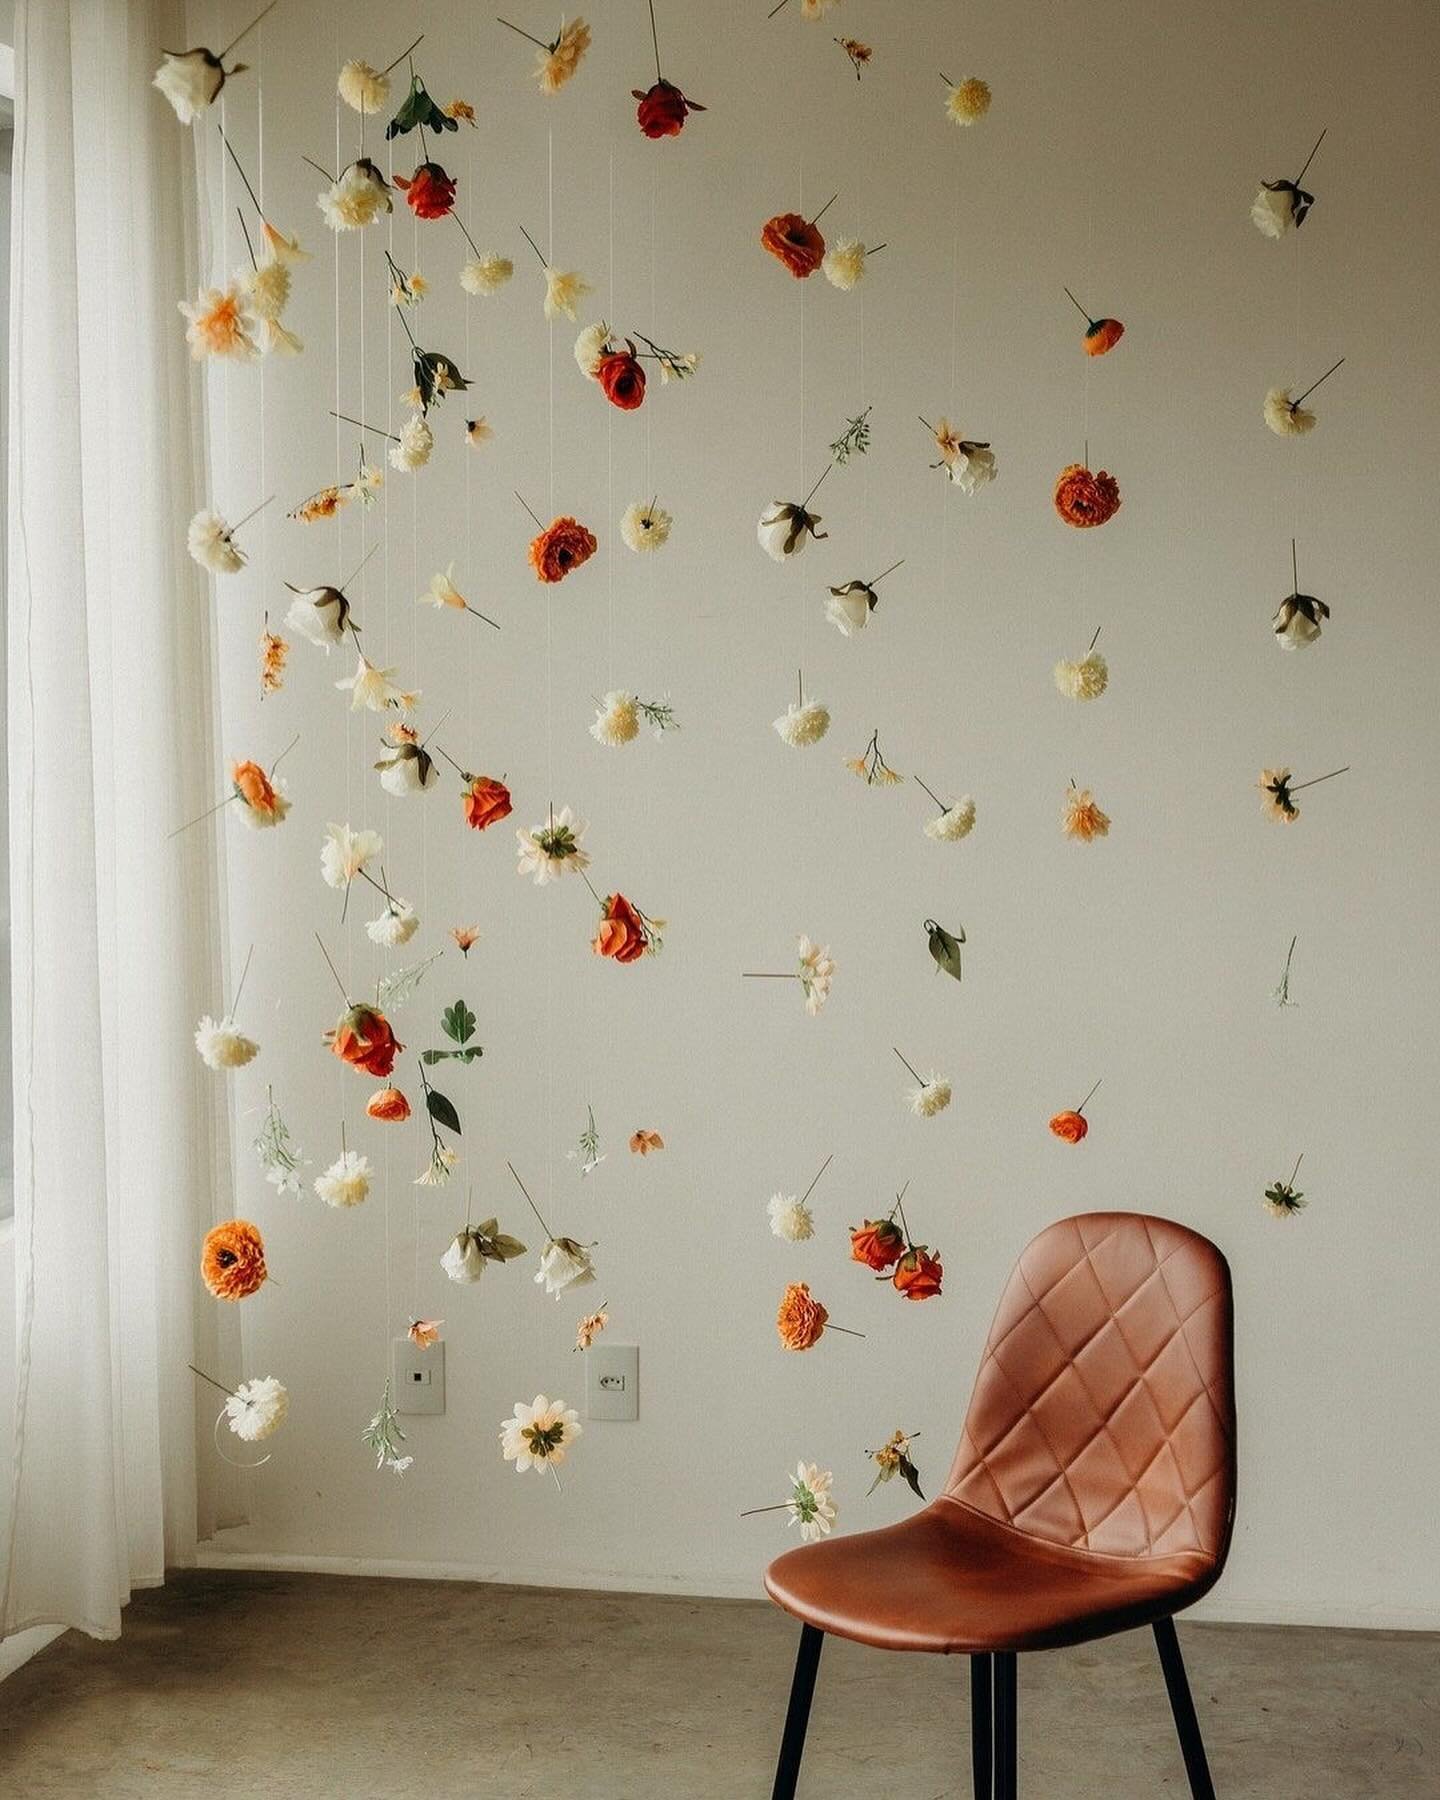 ☔️April showers bring May flowers🌼 

We&rsquo;re welcoming spring with our hanging floral display (photos just for inspo, but set will look similar)! We welcome photographers, content creators and anyone and everyone interested in enjoying this set 